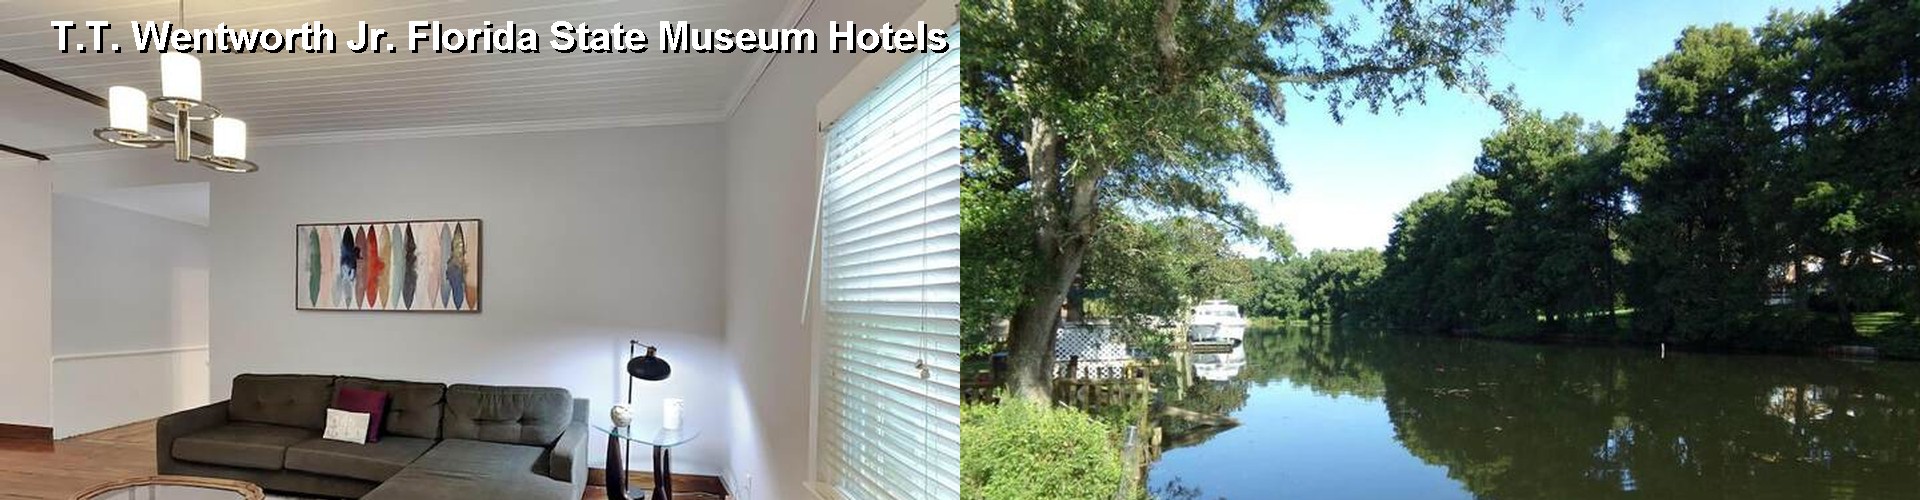 5 Best Hotels near T.T. Wentworth Jr. Florida State Museum